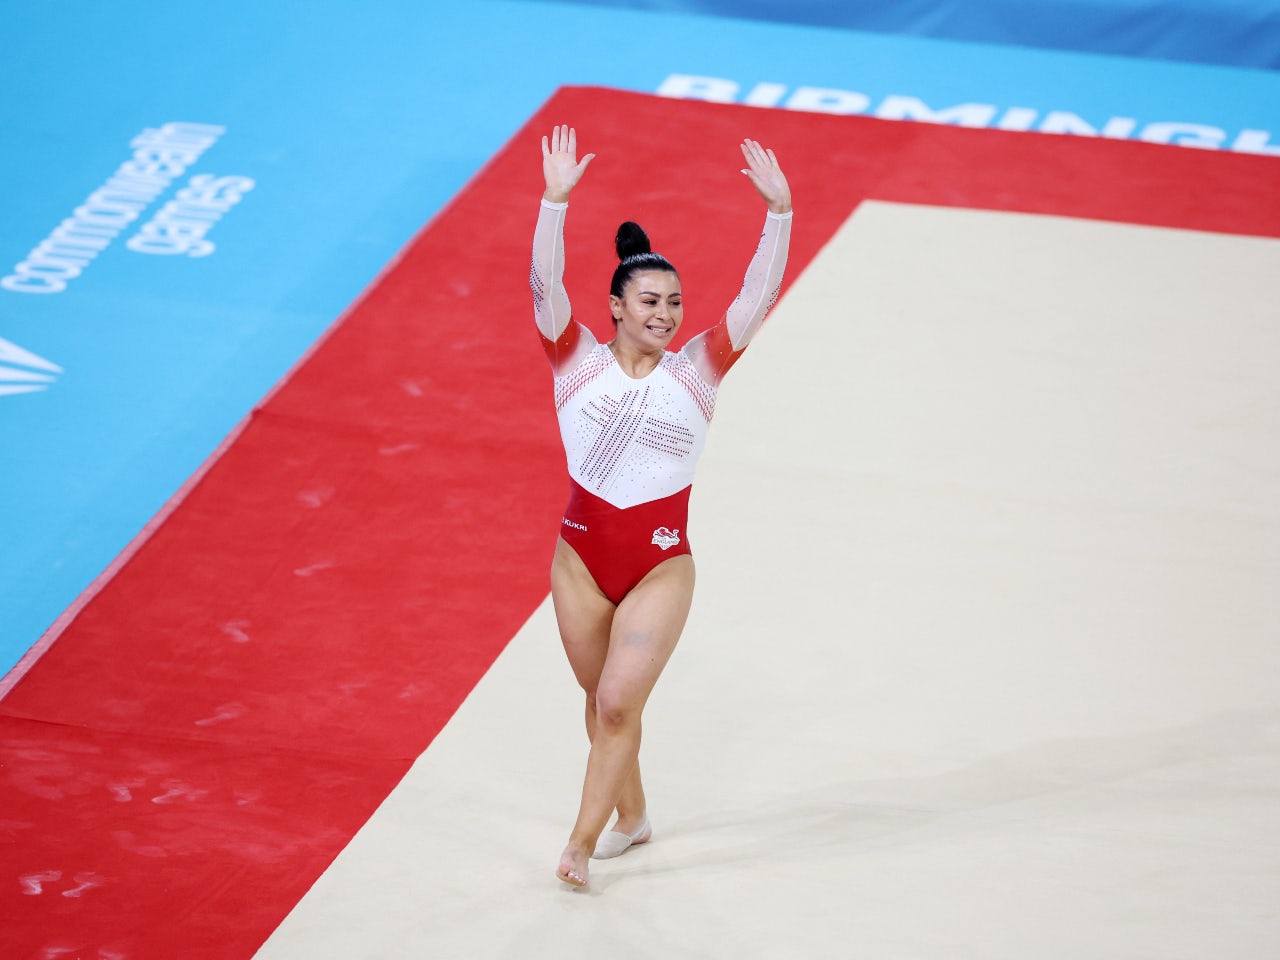 Great Britain's Claudia Fragapane retires from gymnastics aged 26